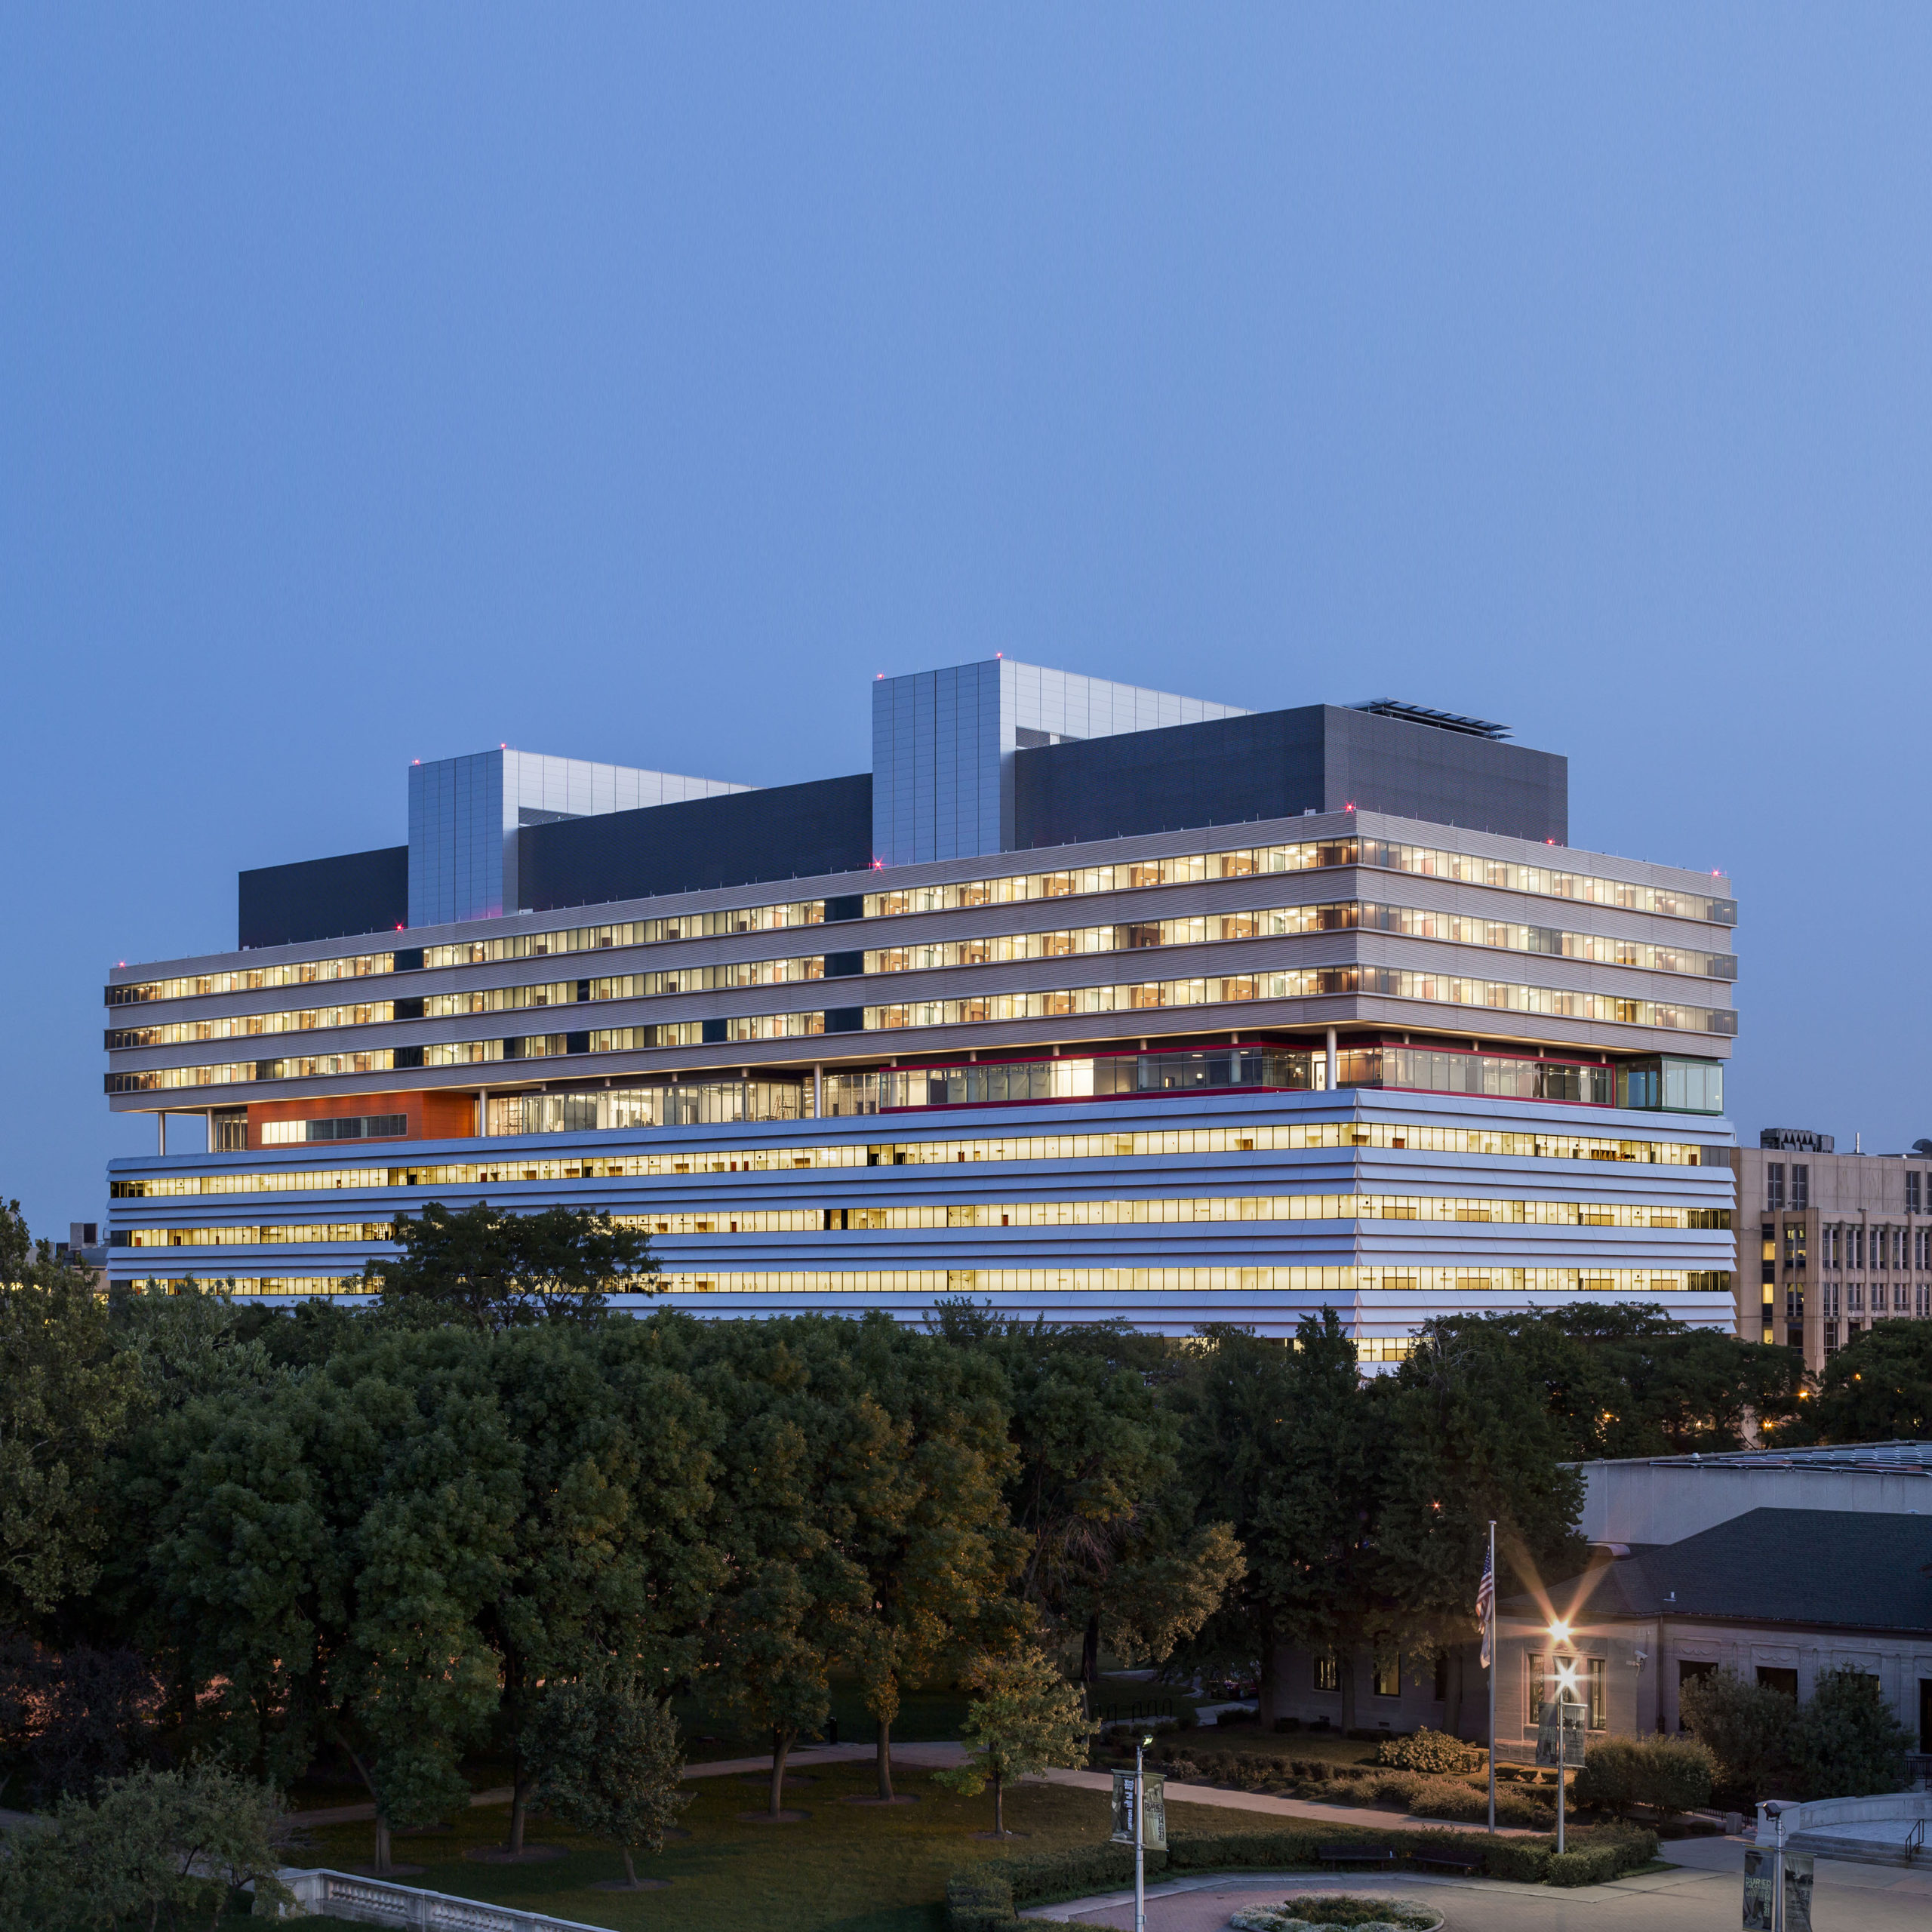 University of Chicago Medicine, Center for Care and Discovery. 
©Tom Rossiter, Courtesy Rafael Viñoly Architects